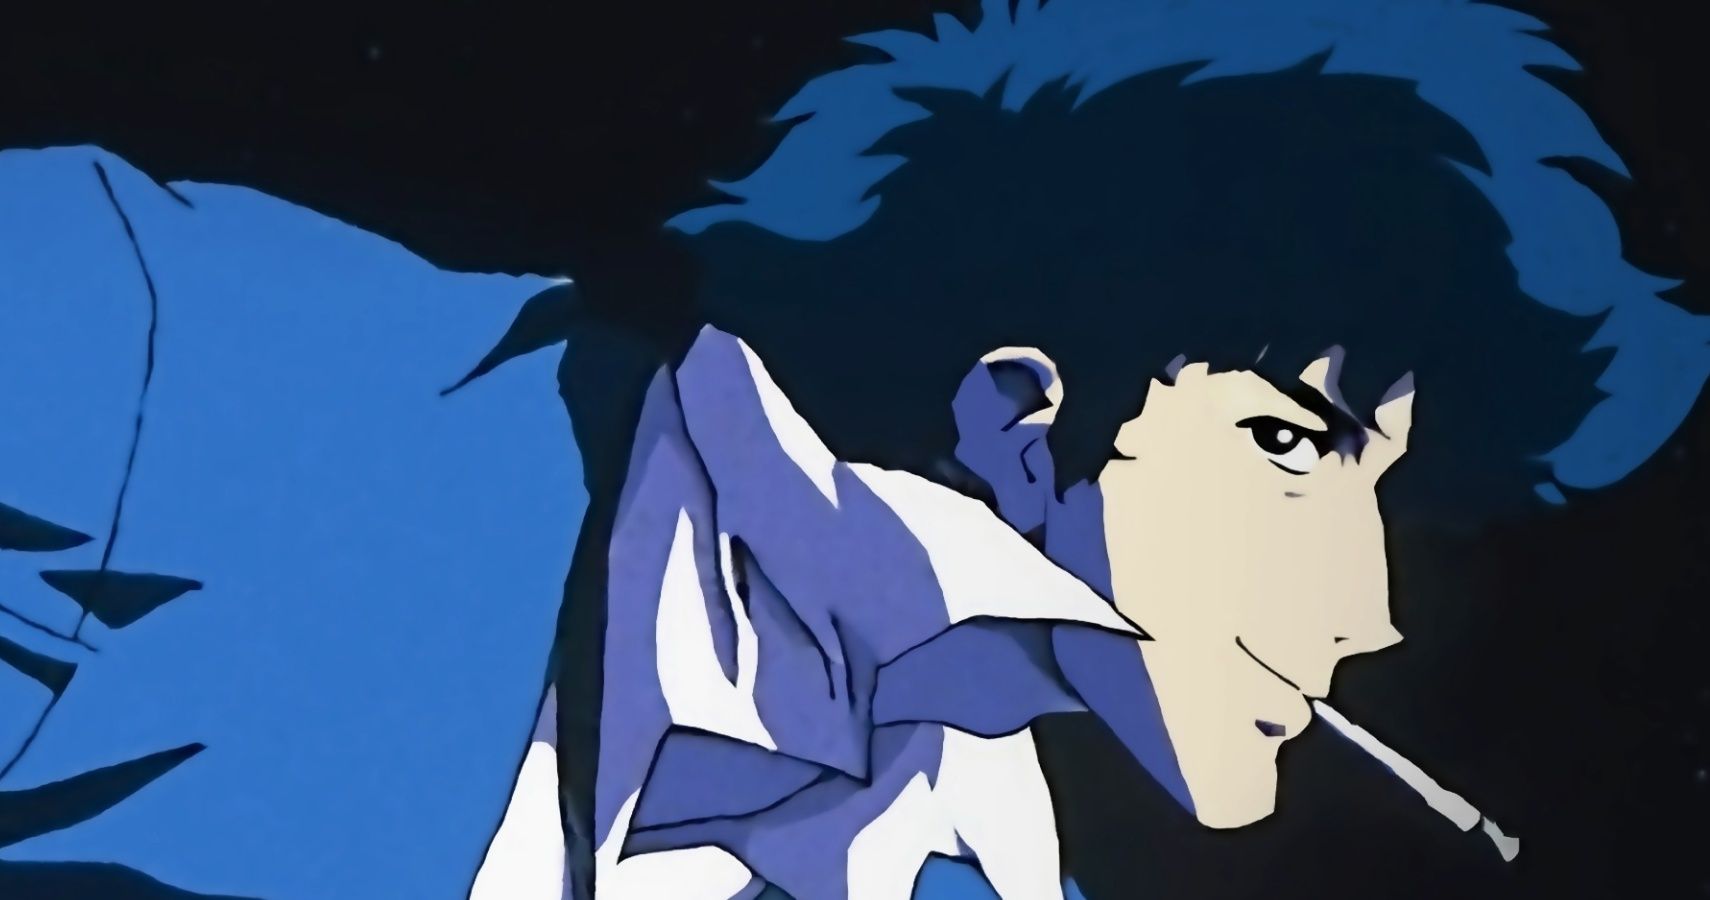 Spike Spiegel from Cowboy Bebop | CharacTour